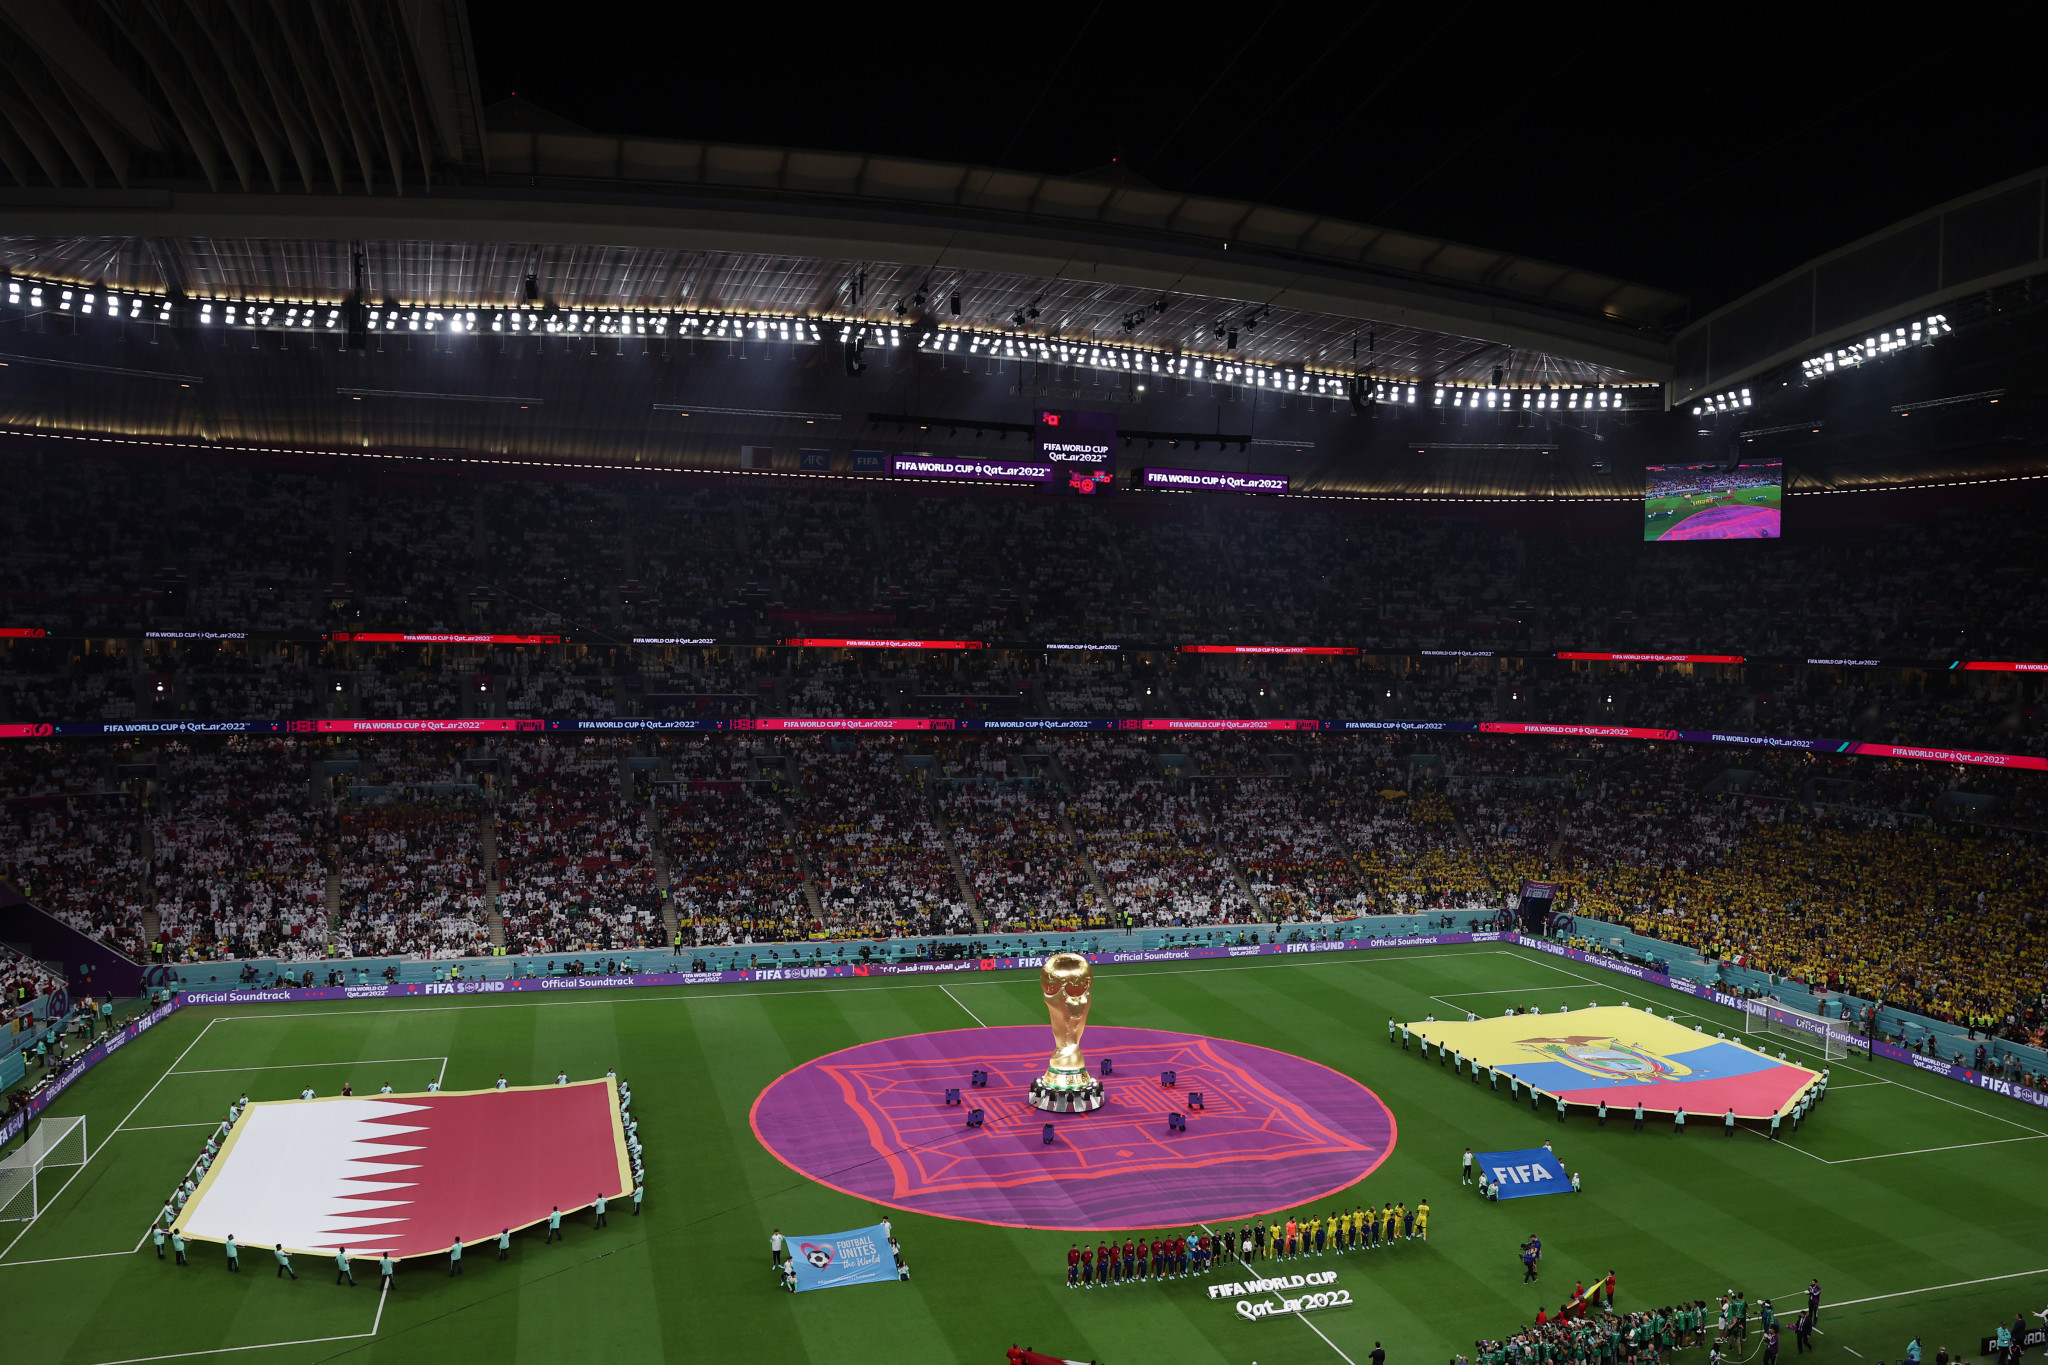 Following the Opening Ceremony, Qatar began its controversial hosting of the FIFA World Cup ©Getty Images